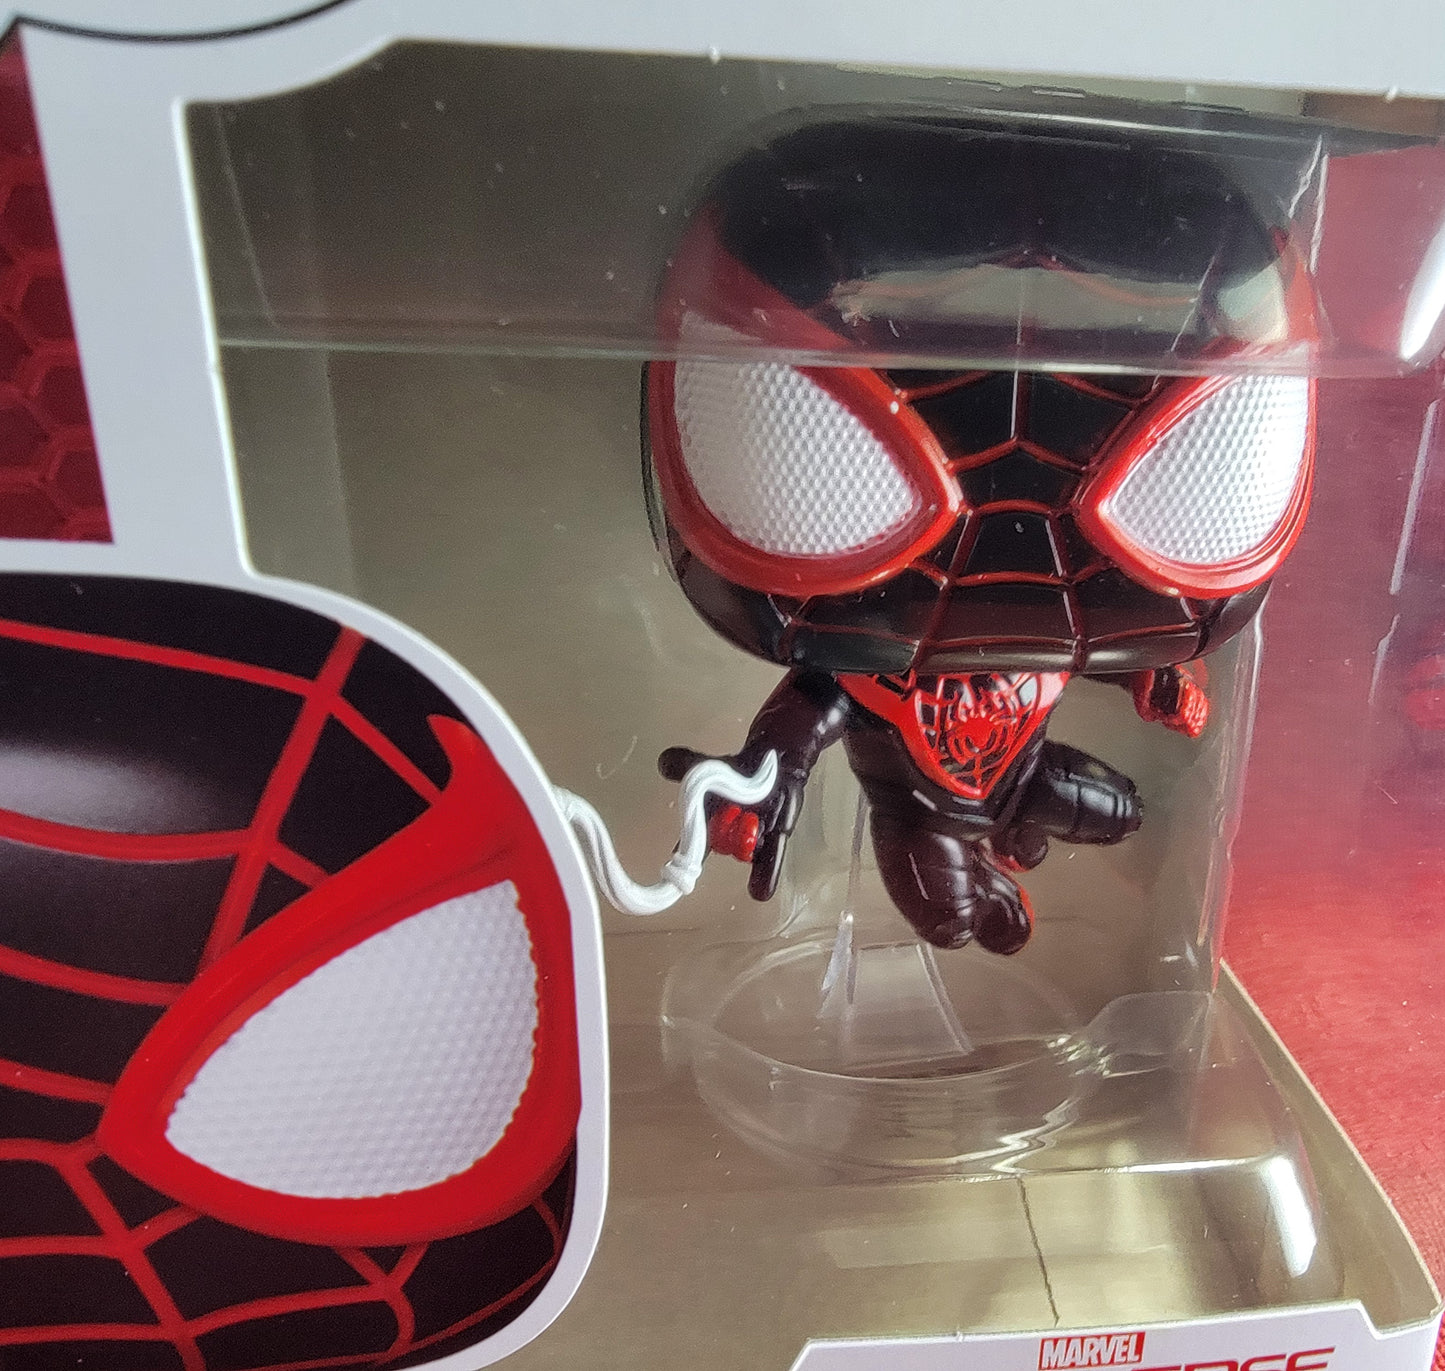 Miles morales upgraded suit funko # 970 (nib)
With pop protector